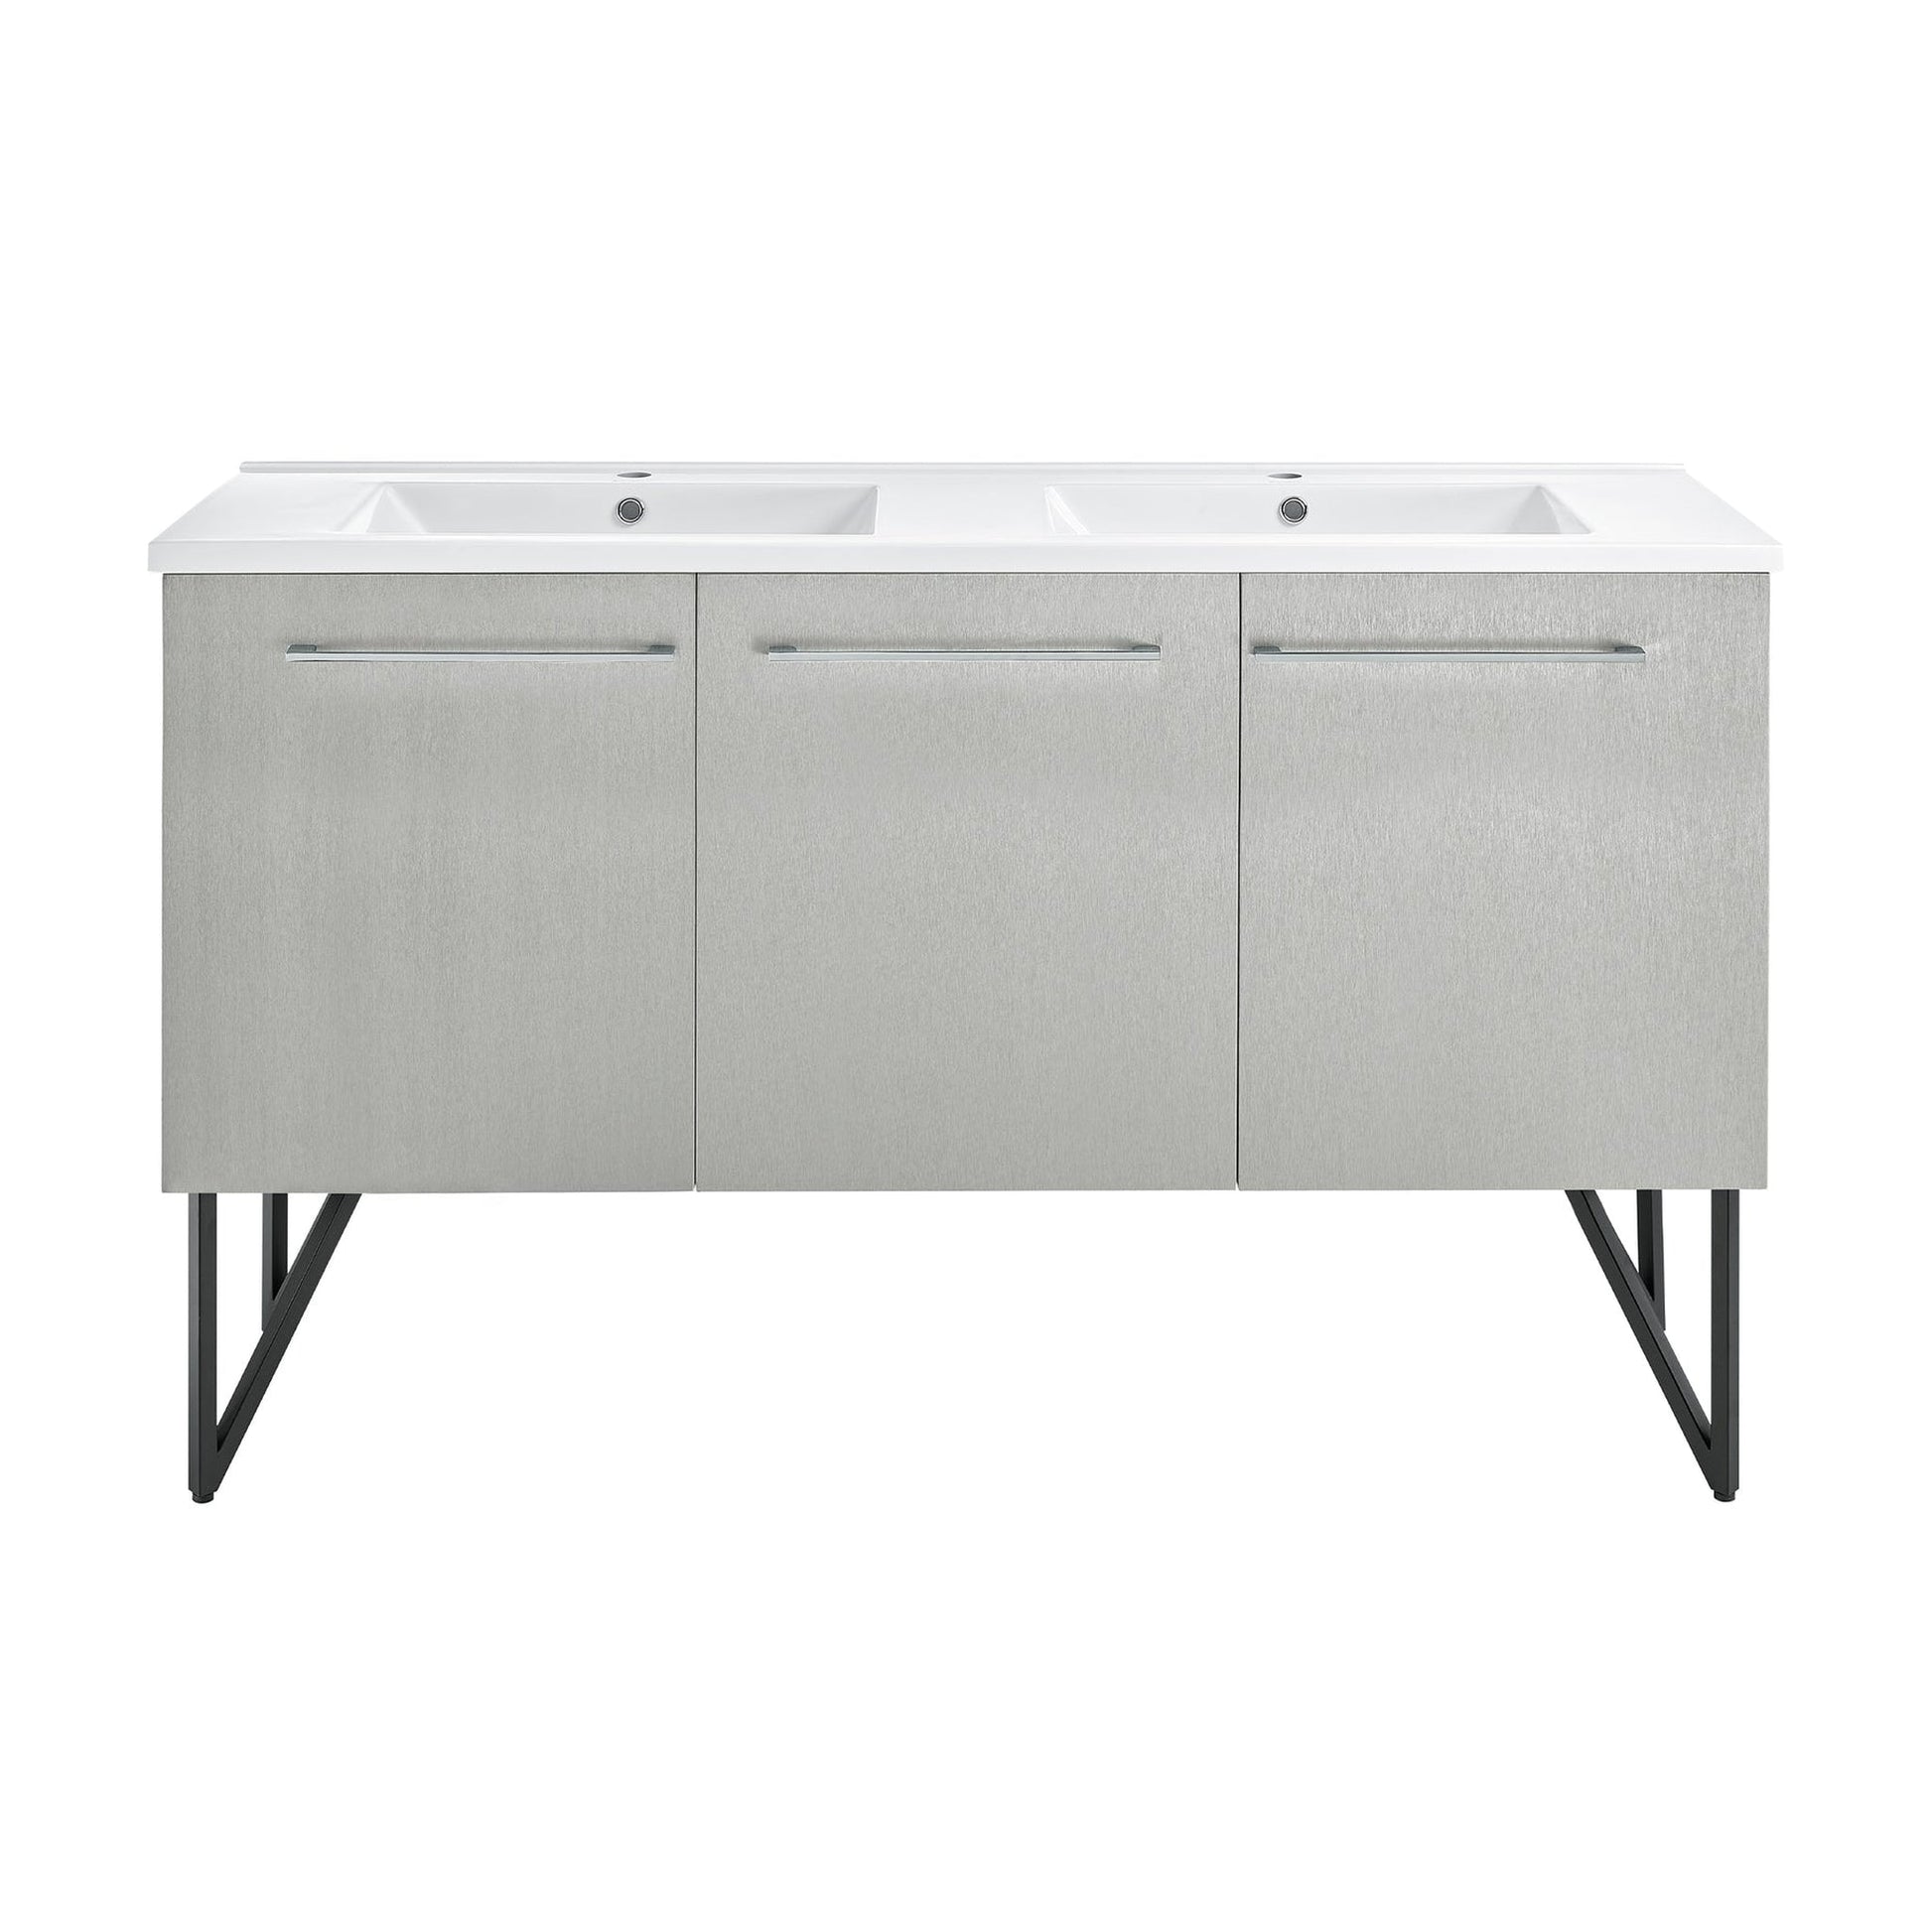 Swiss Madison Annecy 60" x 36" Freestanding Brushed Gray Bathroom Vanity With Ceramic Double Sink and Stainless Steel Metal Legs